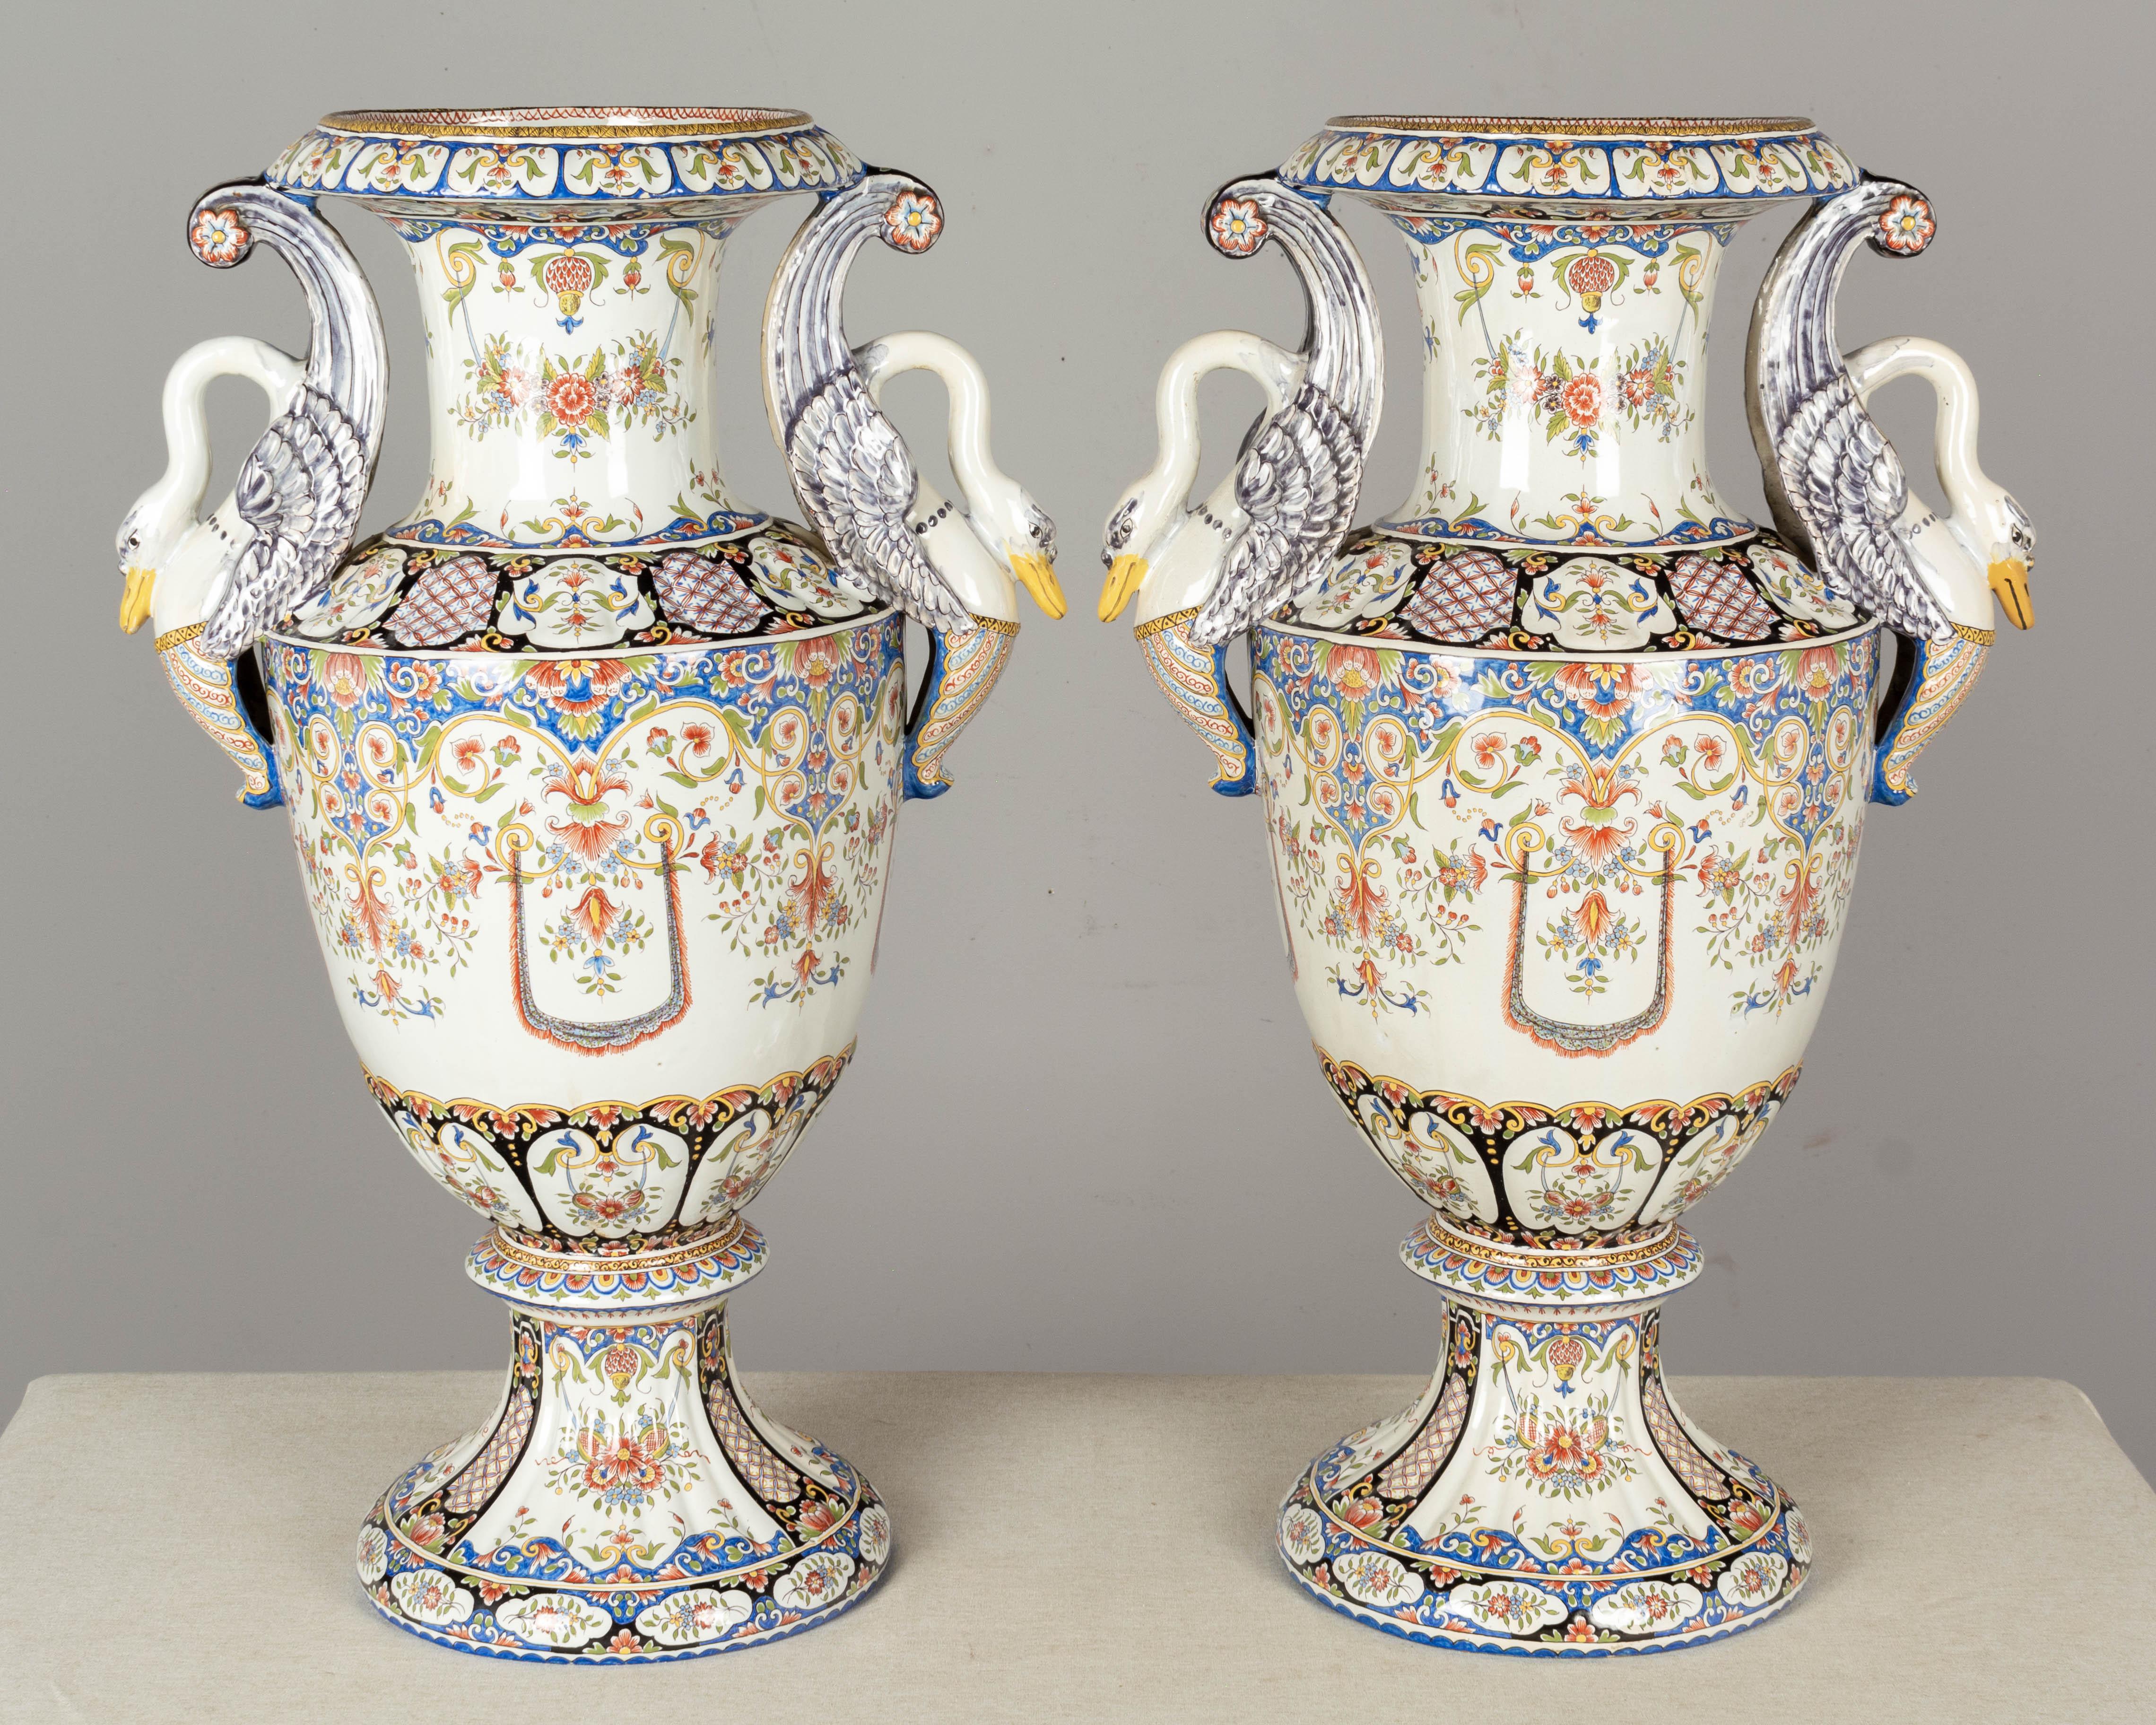 An exceptional pair of large 19th century French faience urns from Desvres, by Fourmaintraux-Freres. Beautiful hand-painted floral decoration and sculptural swan handles. Elegant form with nice proportions. In almost mint condition with the beak of